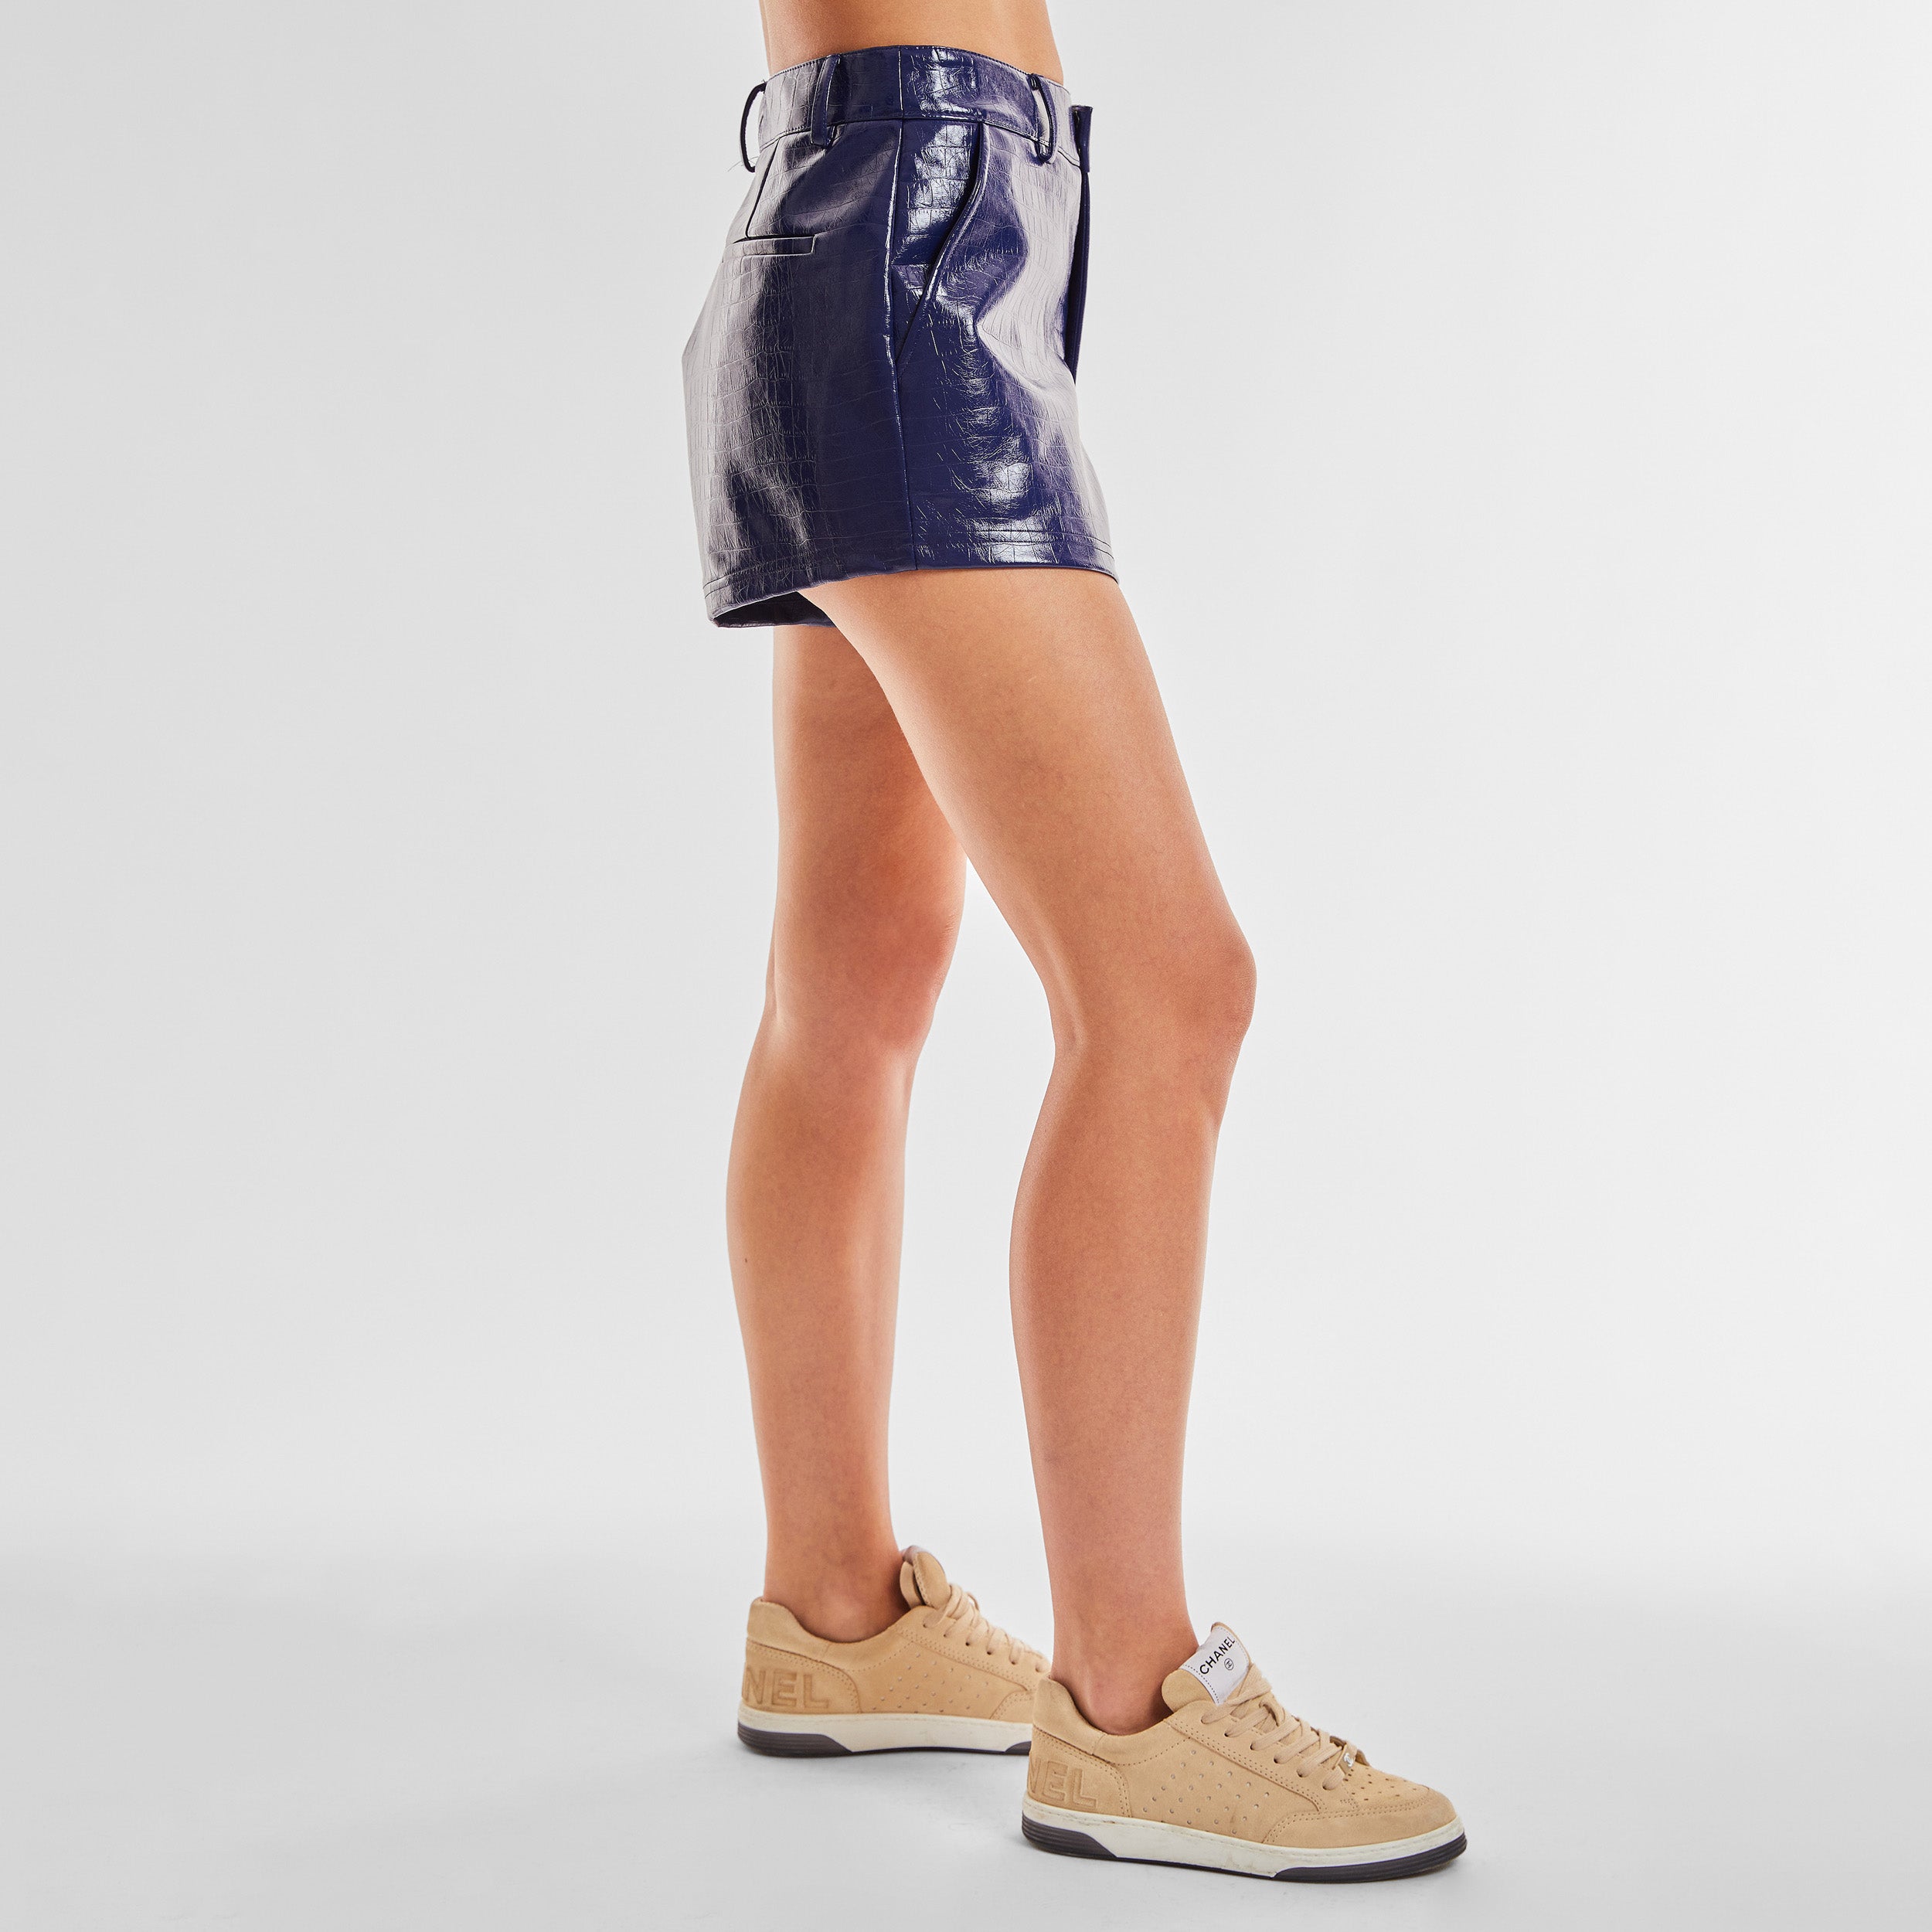 Side view of woman wearing blue faux leather short with croco embossed pattern.